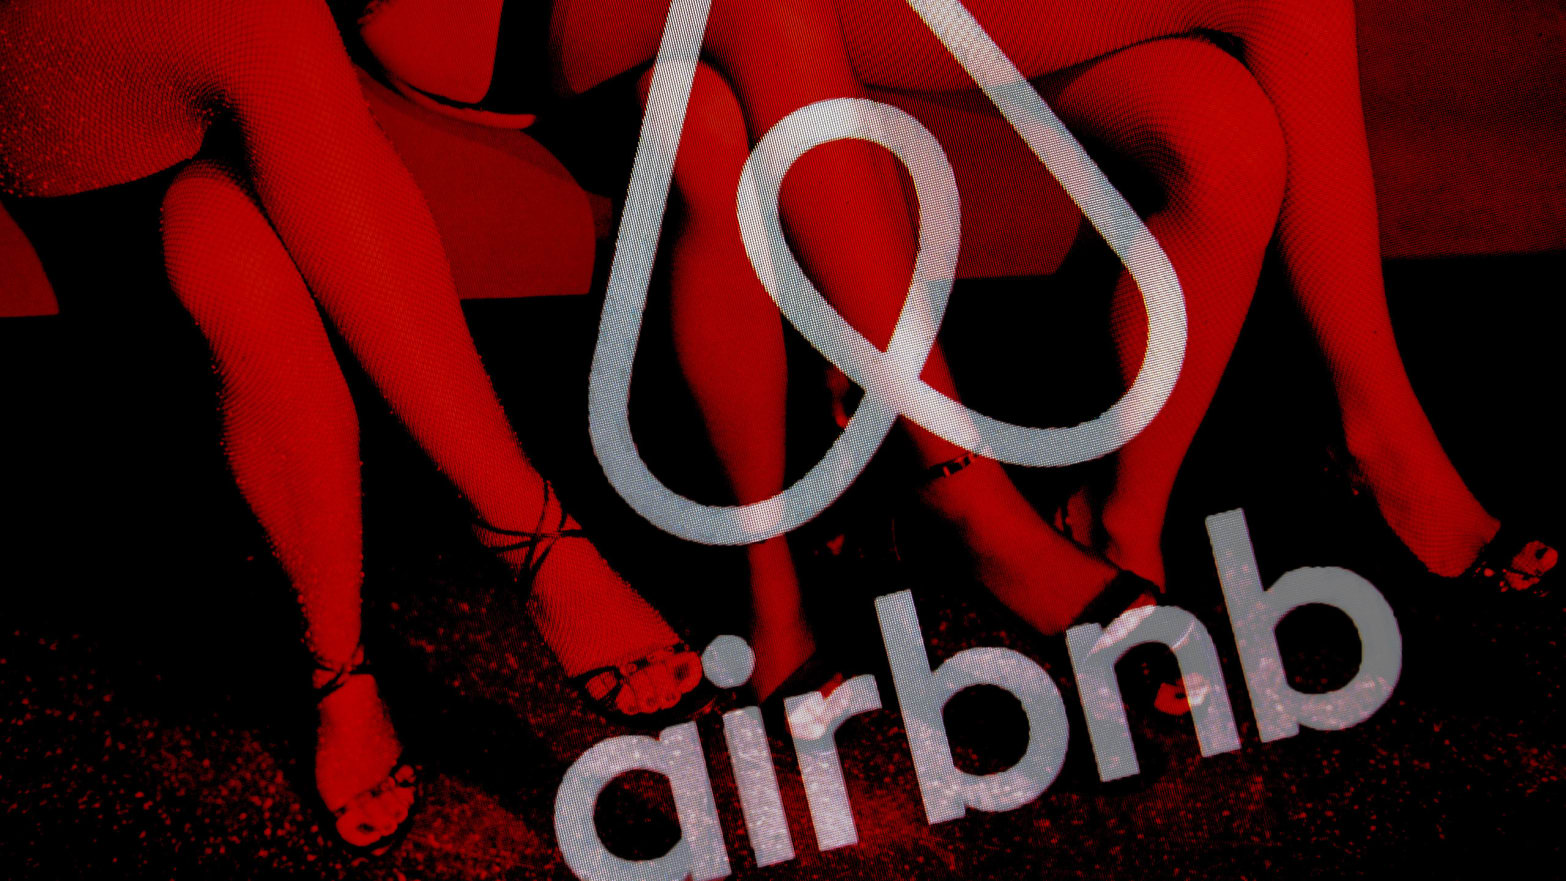 Dejaen Porn - Airbnb's War on Porn Stars: 'They Locked Me Out'